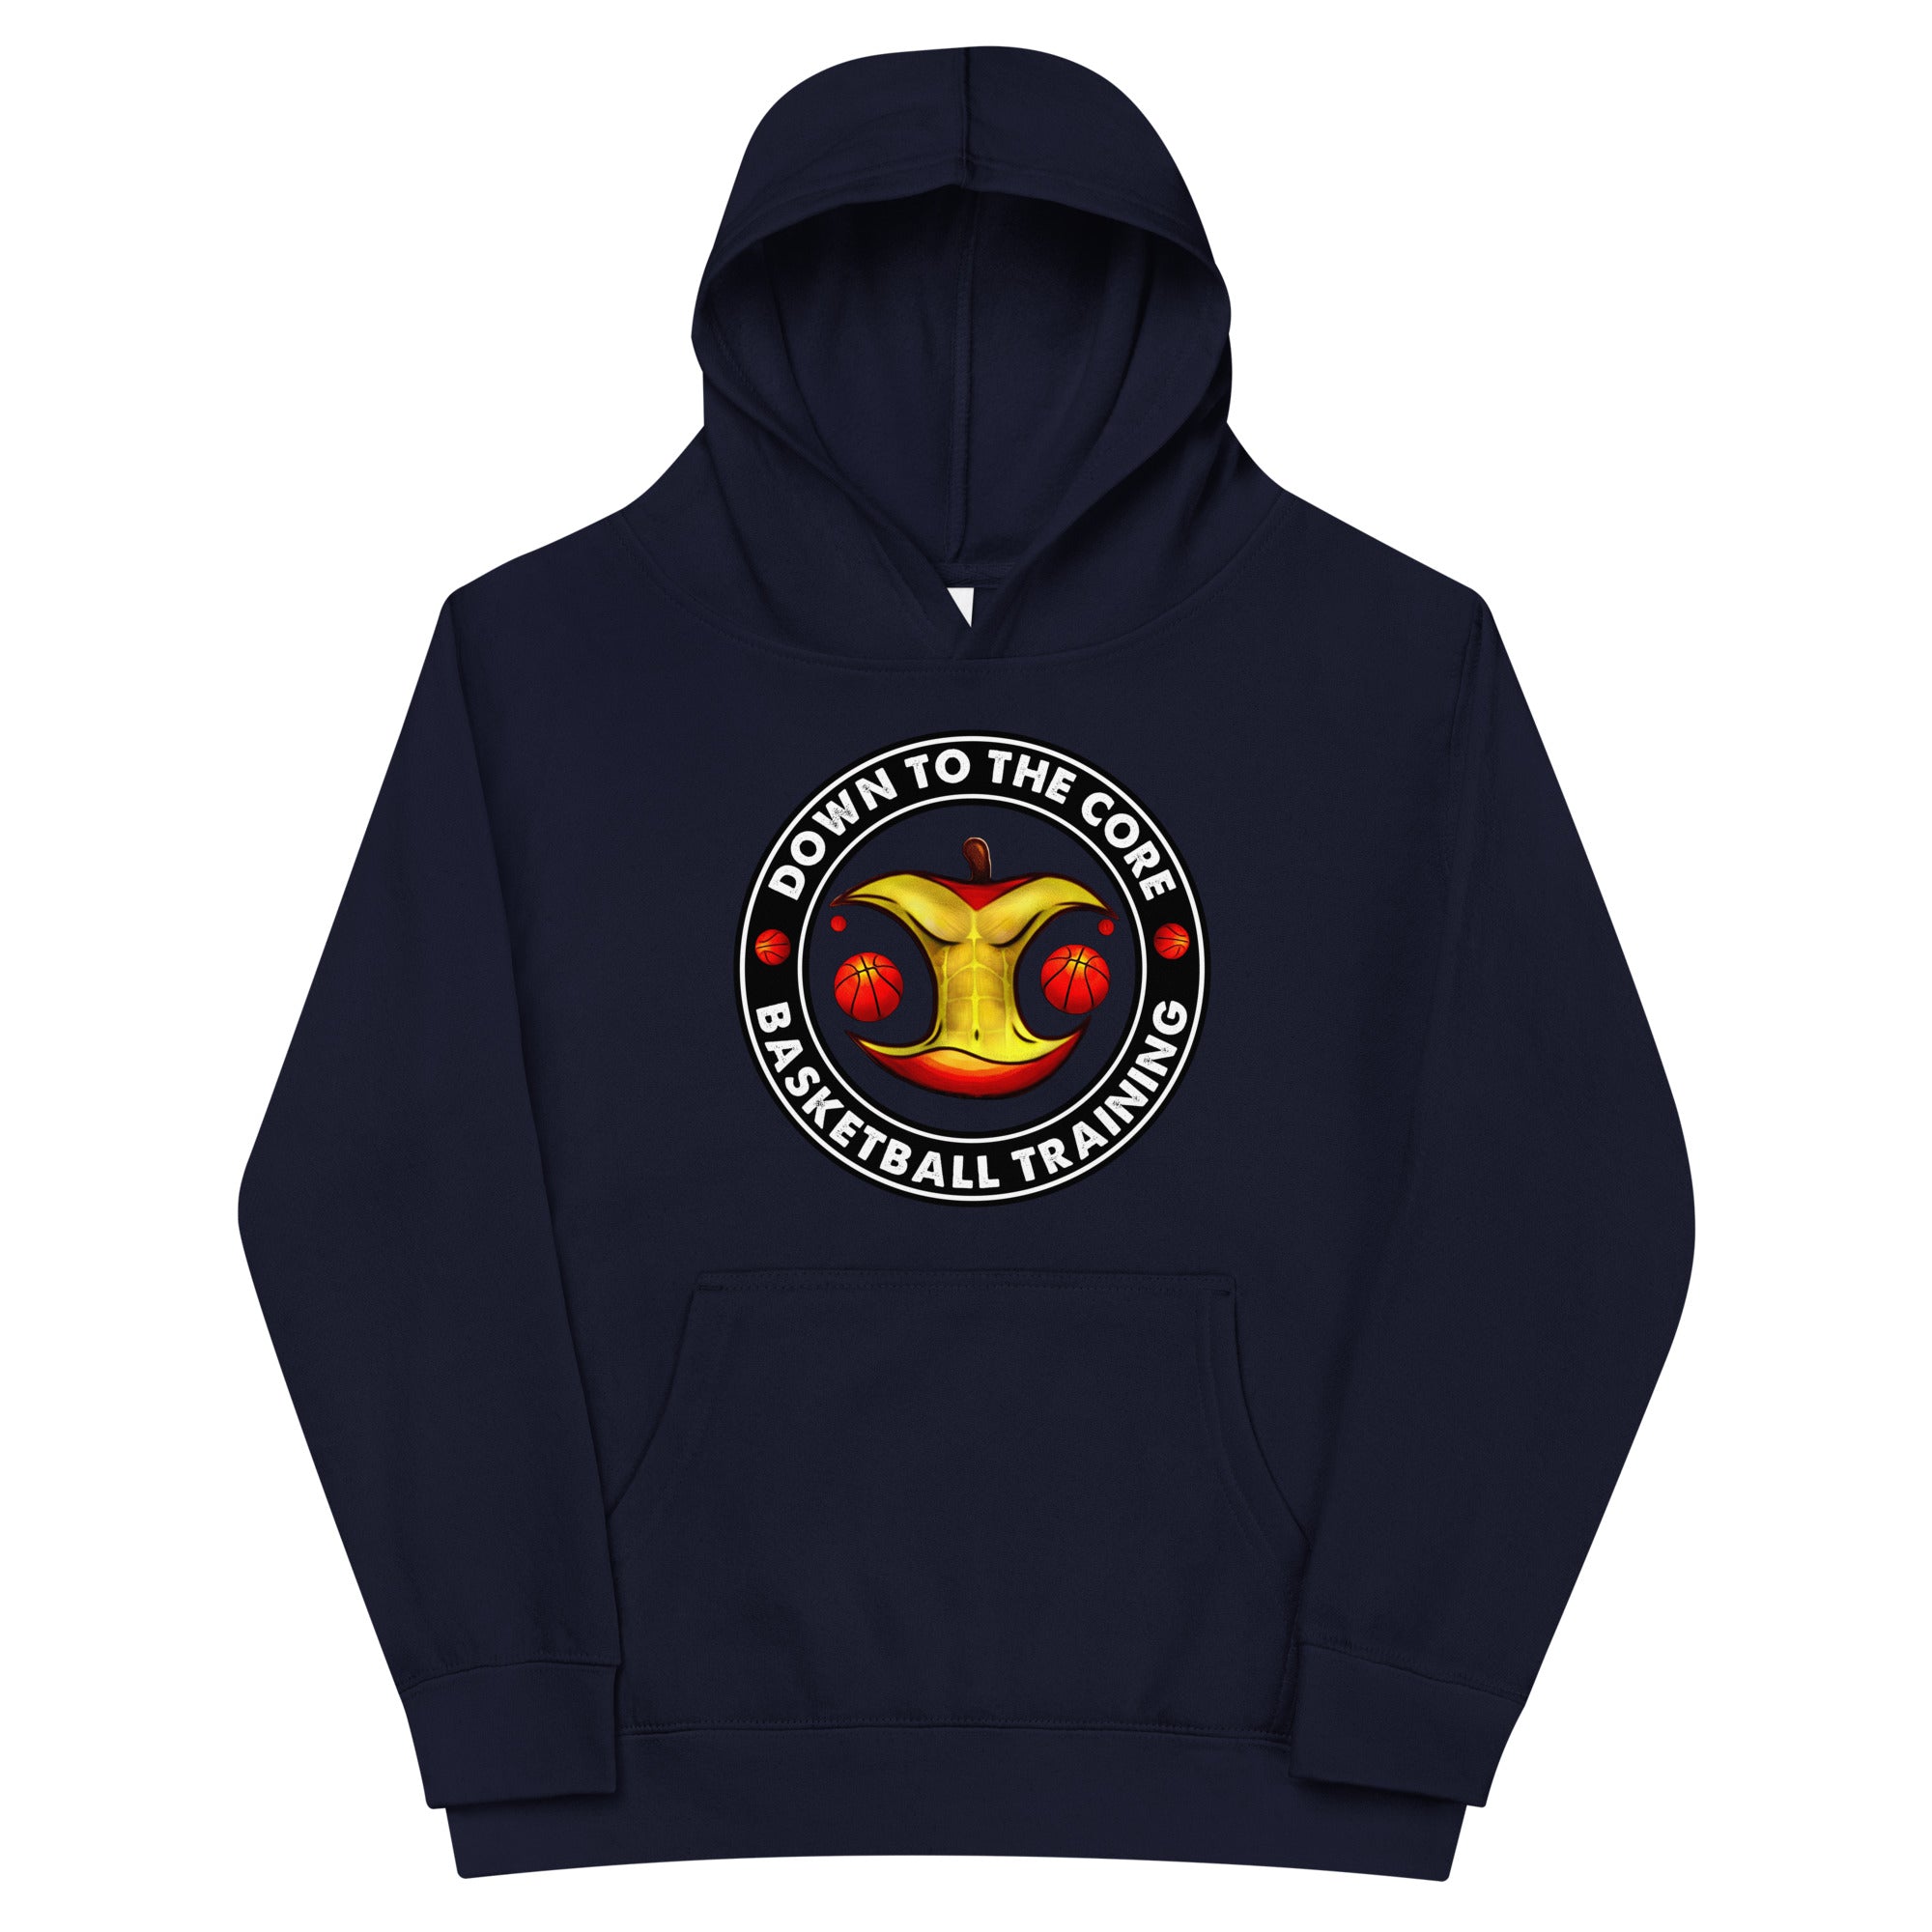 DOWN TO THE CORE TRAINING - Kids Hoodie